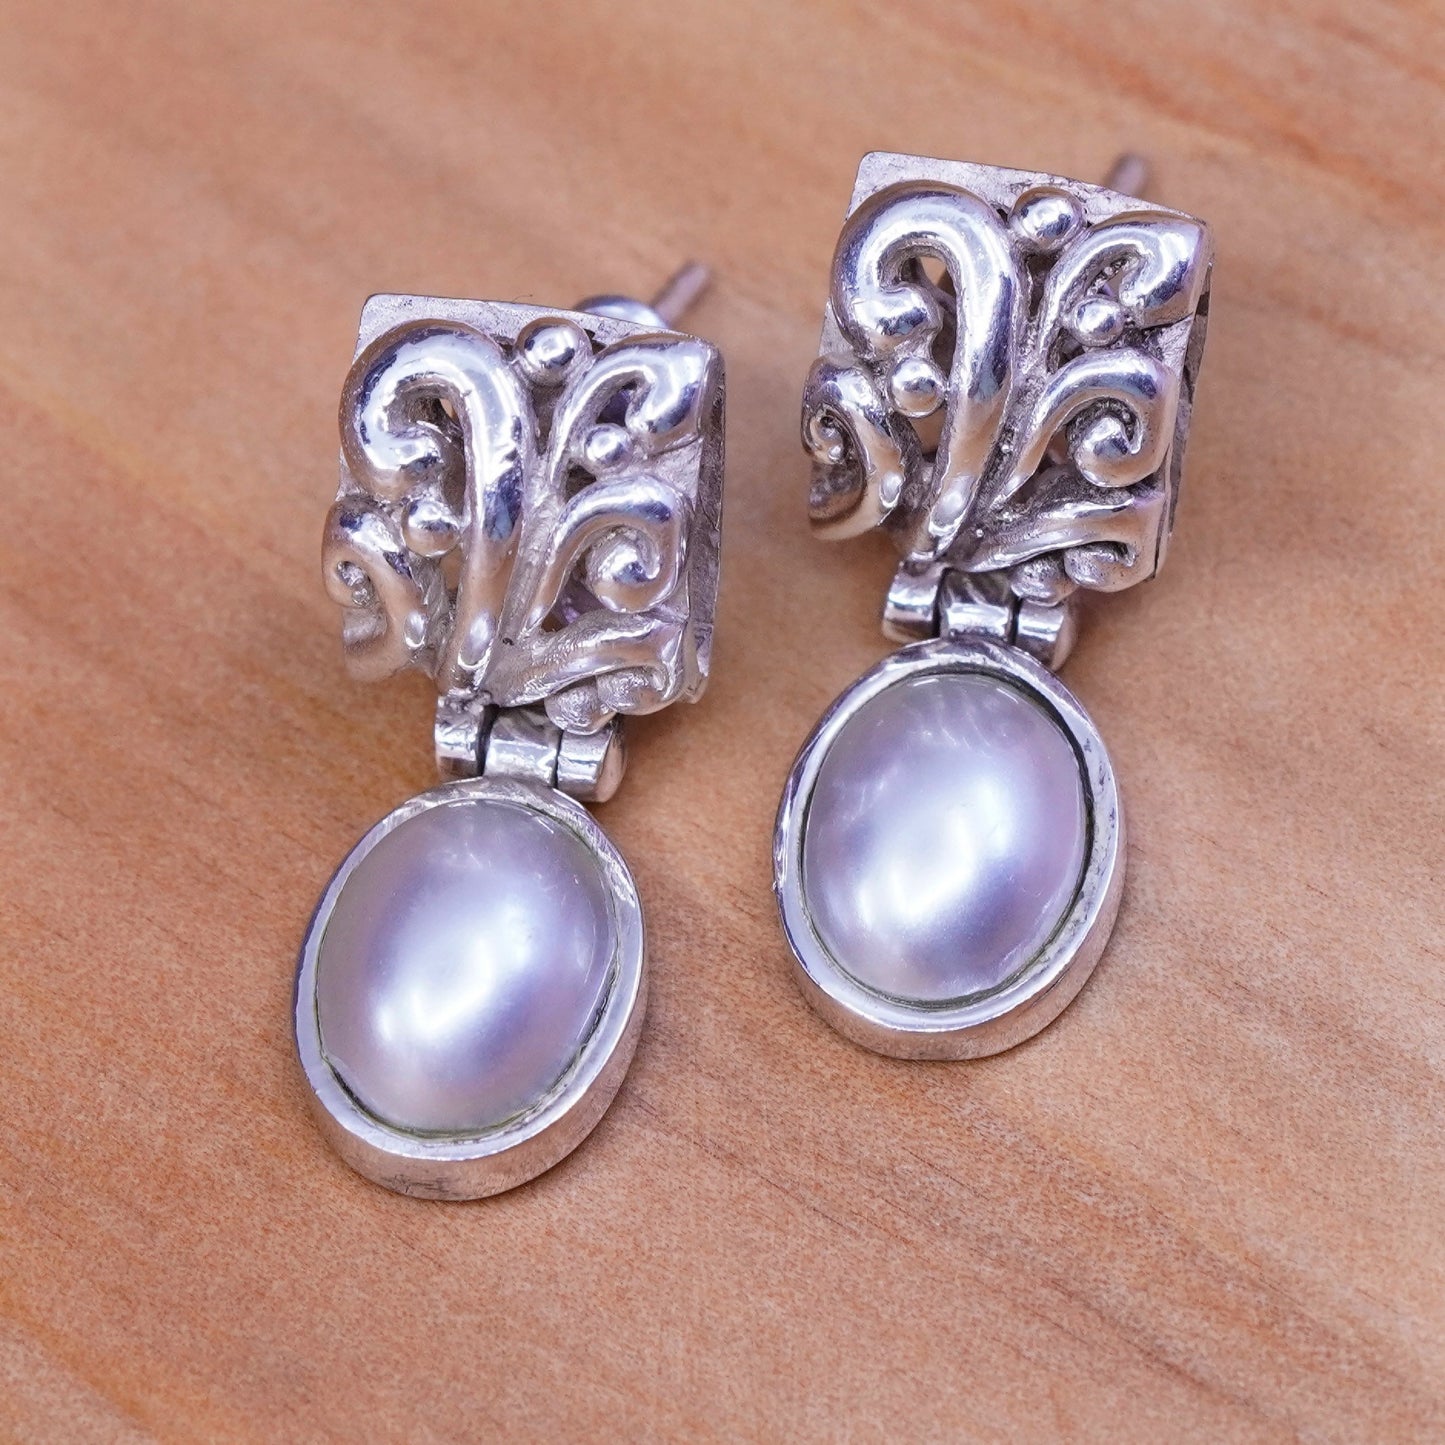 Sterling silver earrings, 925 studs with freshwater pearl drop and filigree